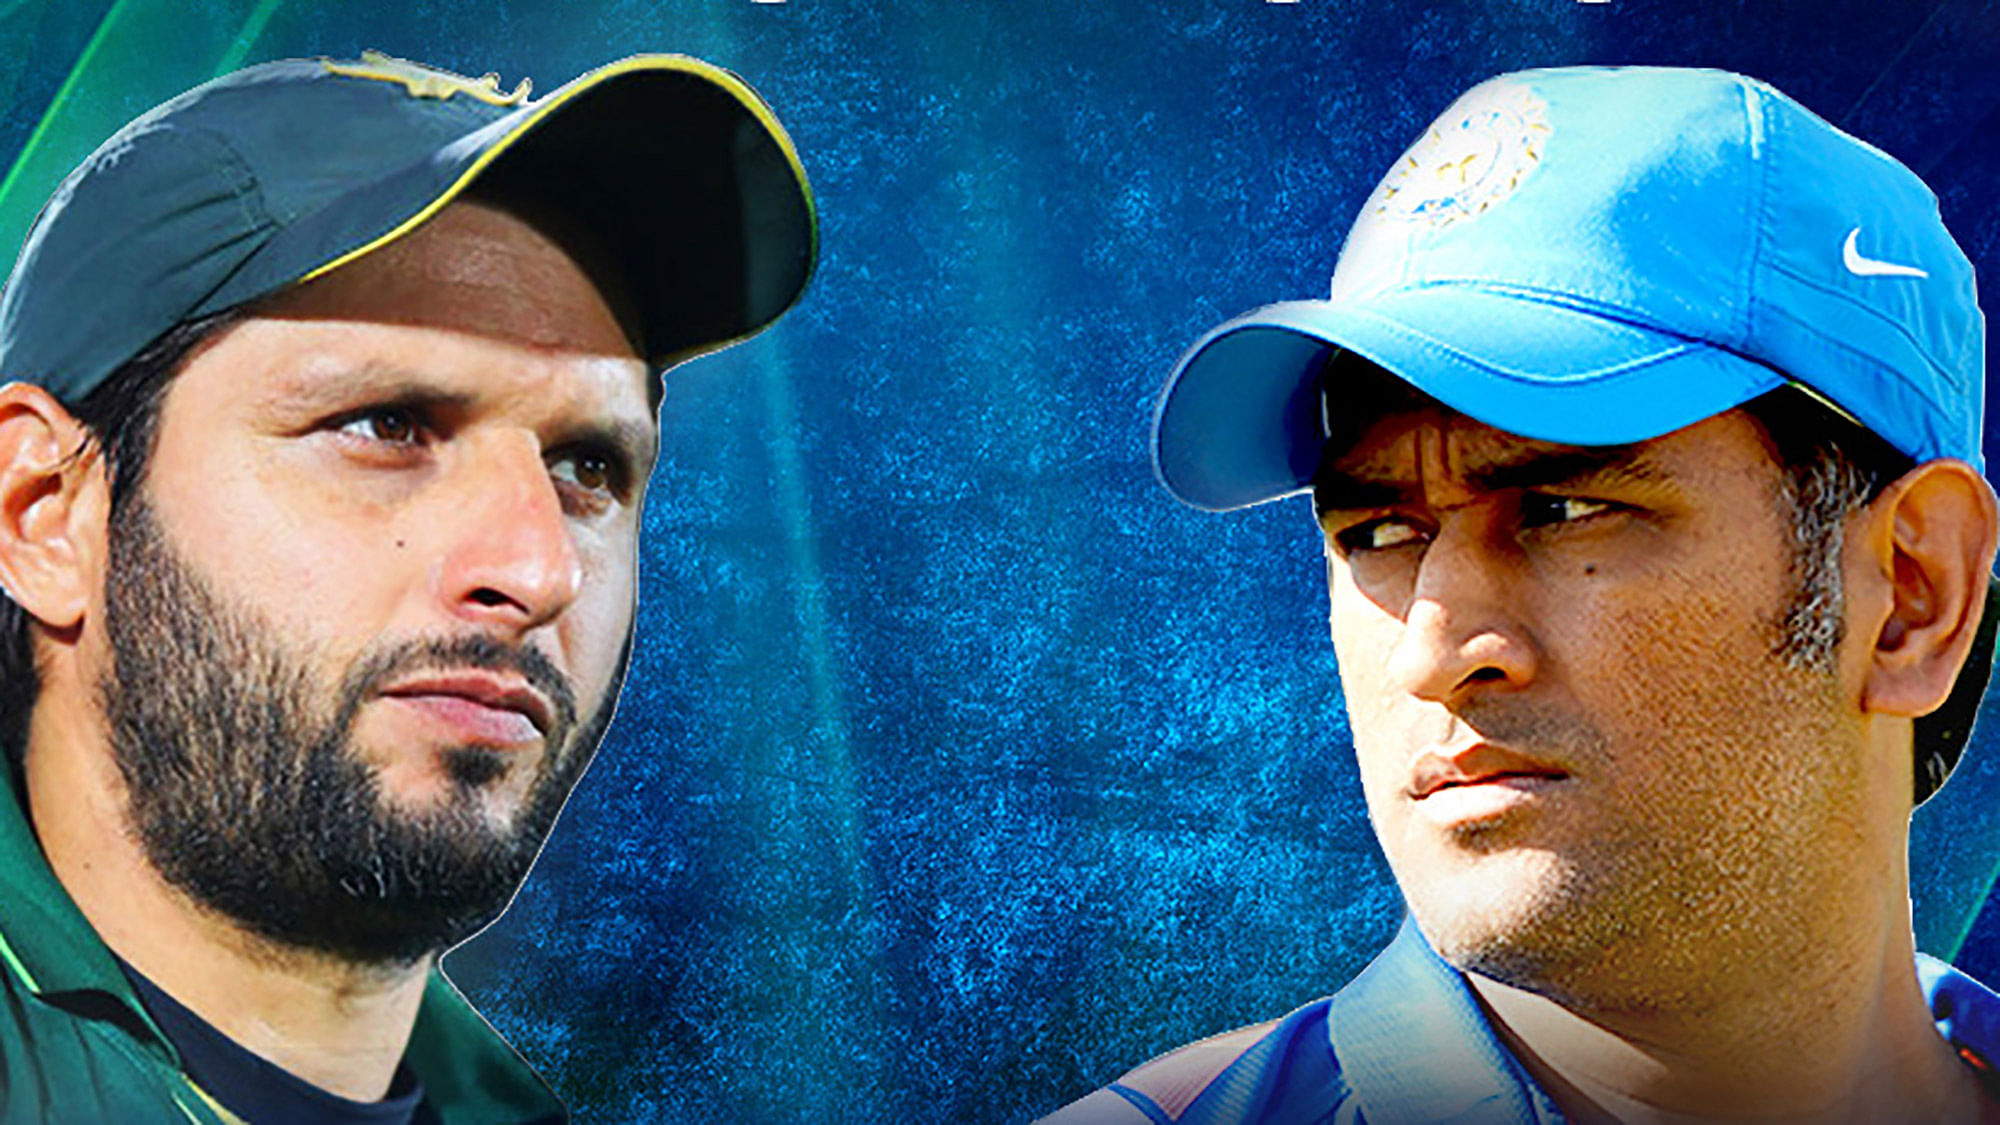 Shahid Afridi’s Pakistan will take on MS Dhoni’s India in the 2016 World T20 Group 2 match on Saturday in Kolkata. (Photo: <b>The Quint</b>)